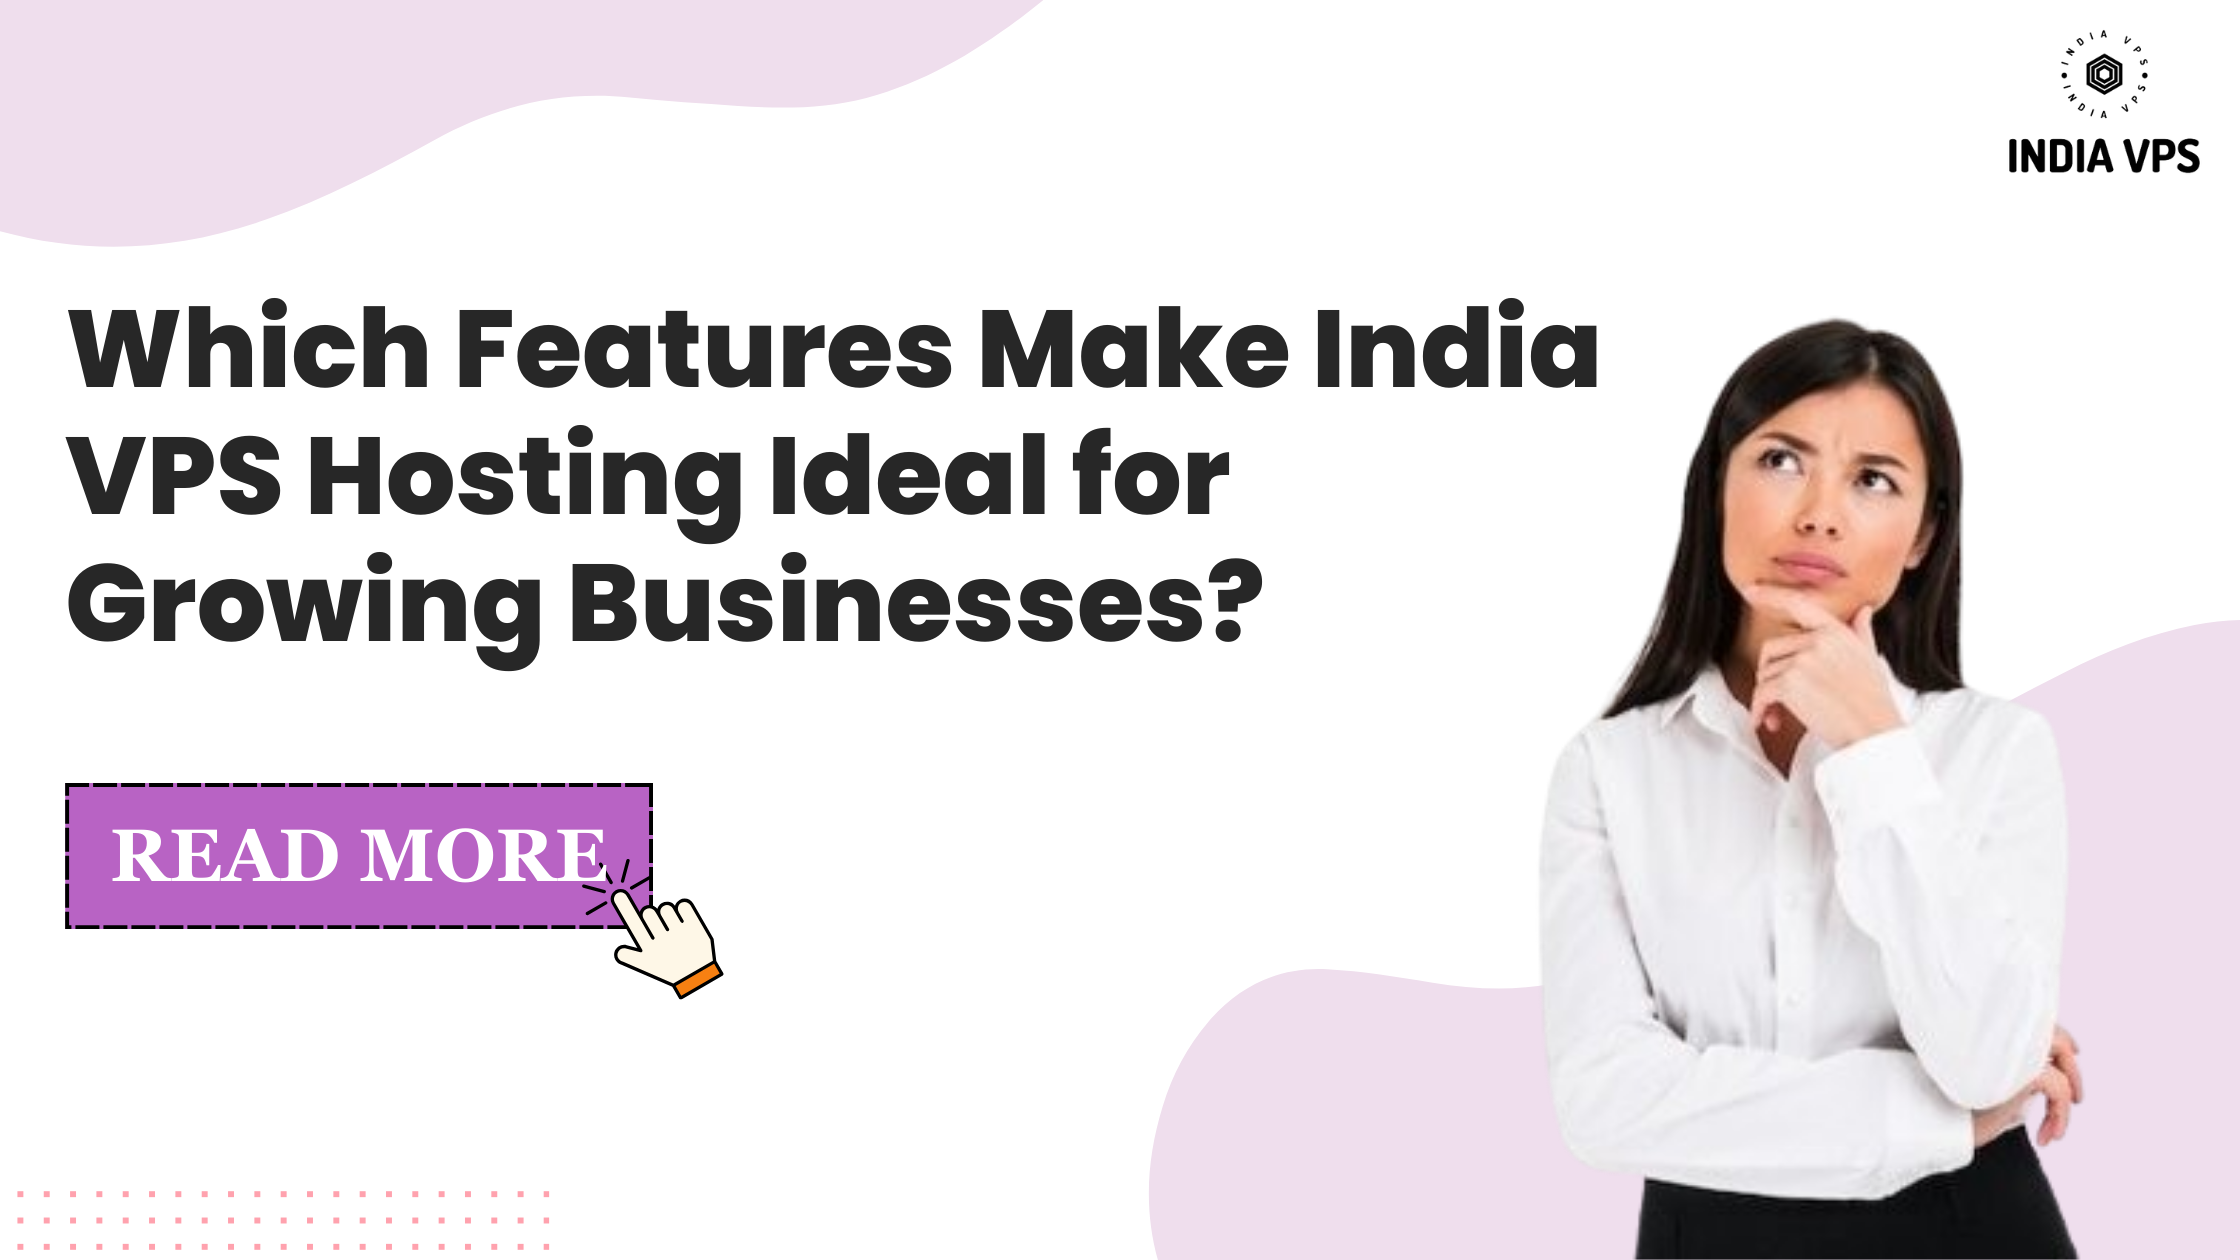 Which Features Make India VPS Hosting Ideal for Growing Businesses?